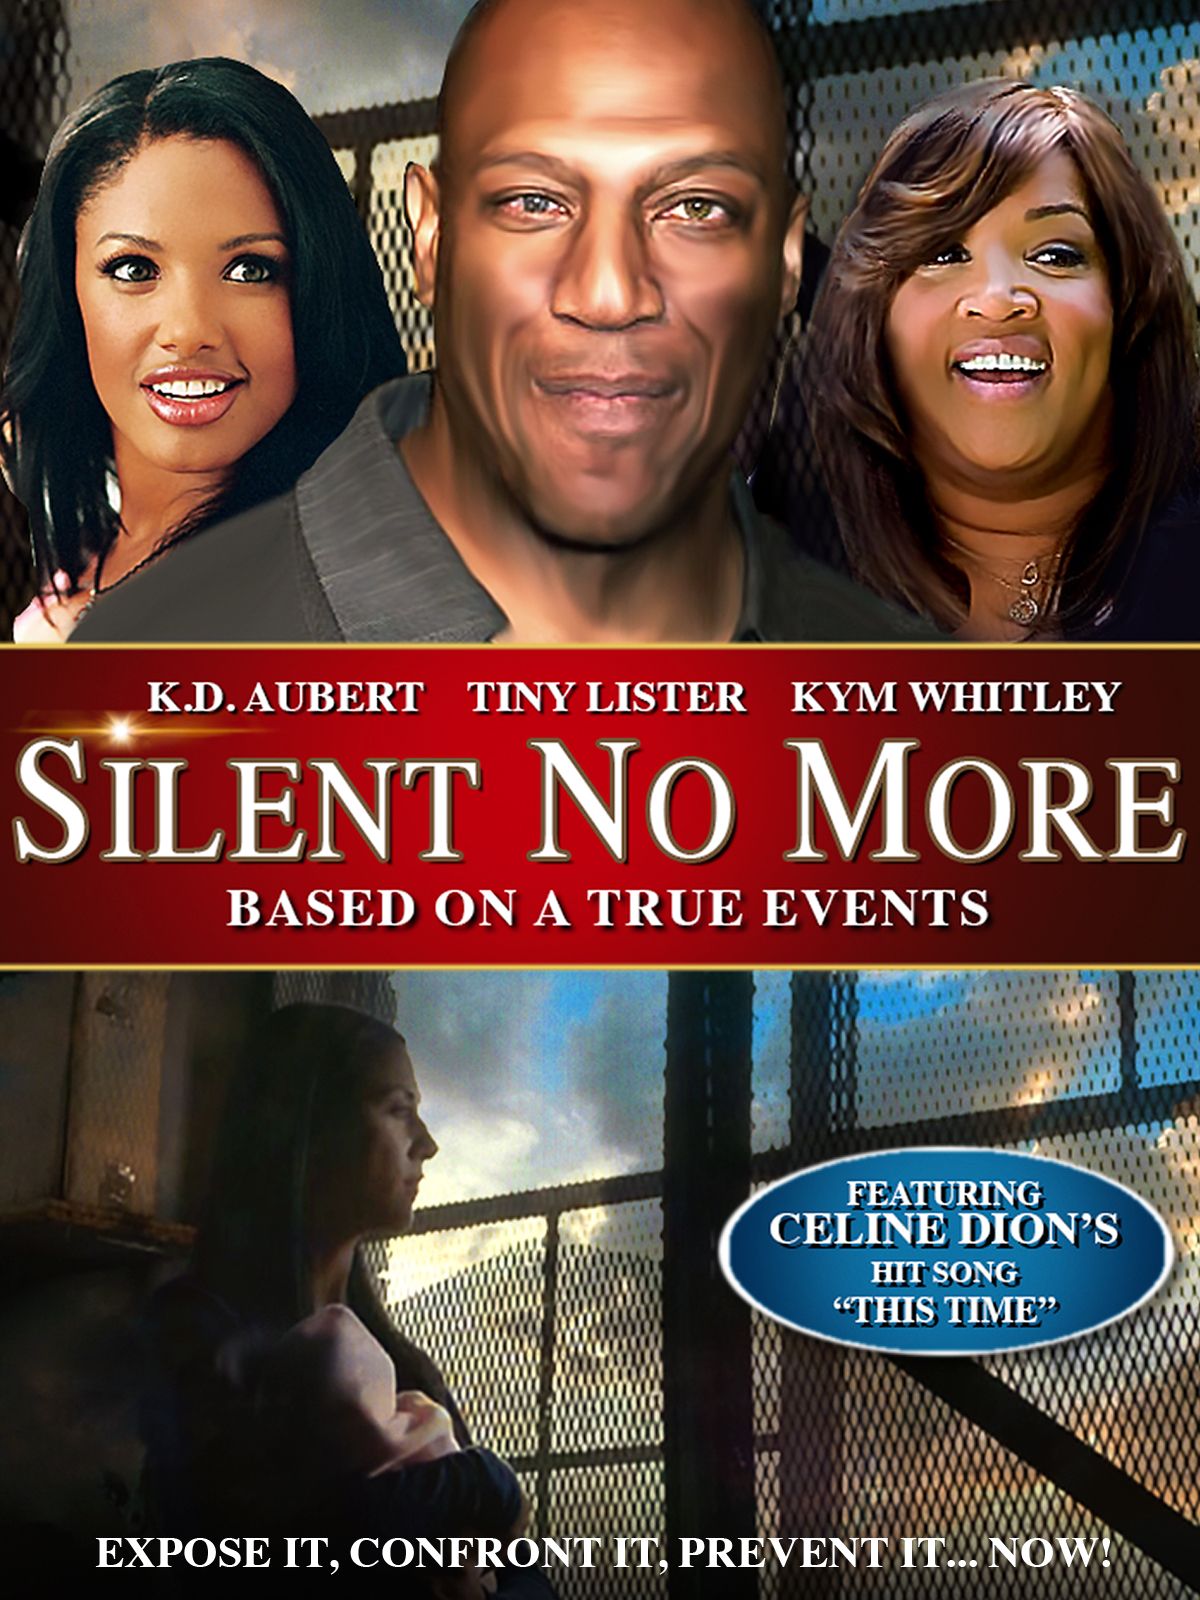 Keyart for the movie Silent No More